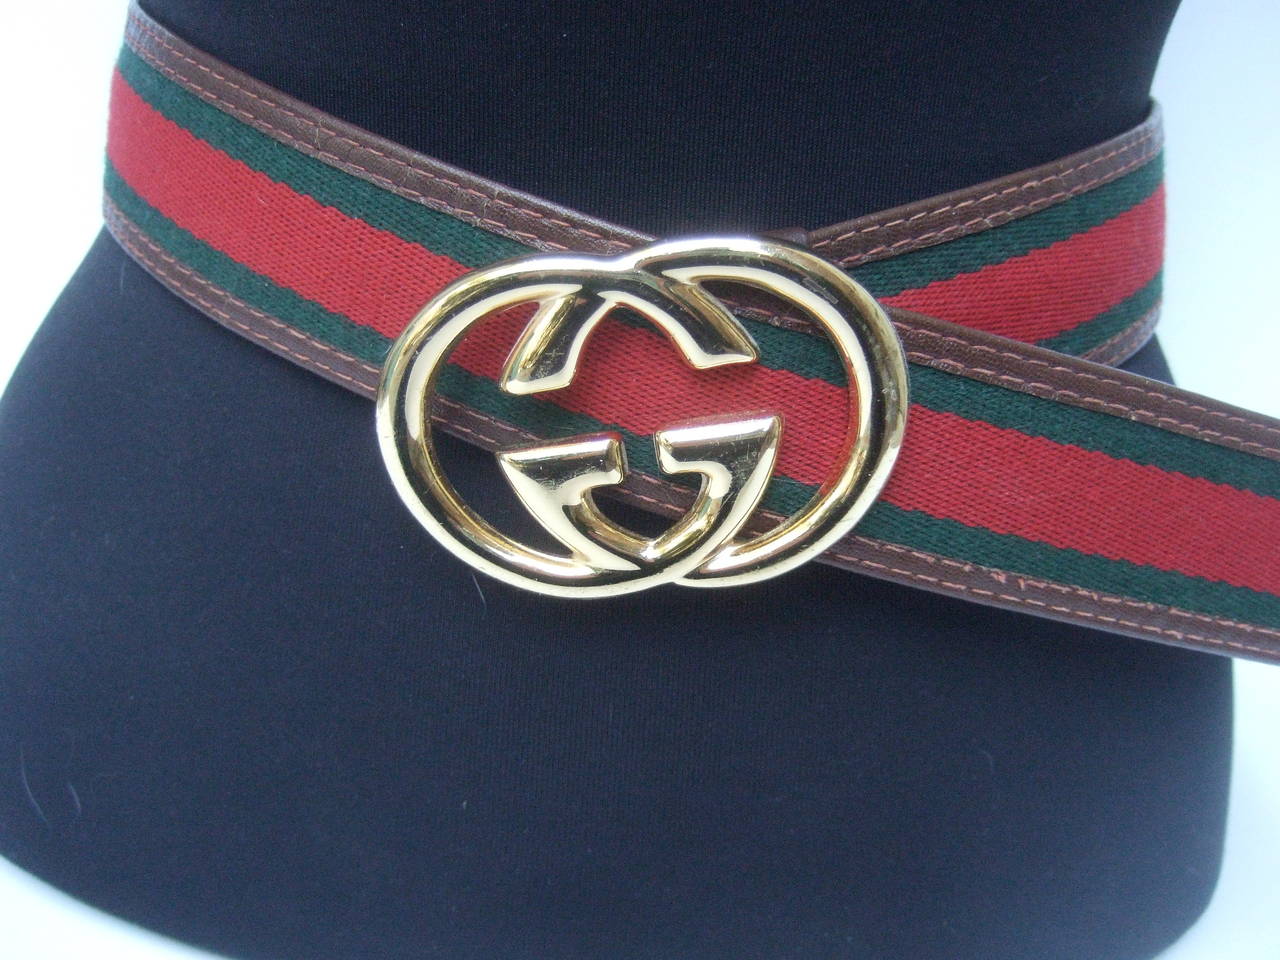 Gucci sleek gilt buckle red & green striped webbed belt c 1980s
The stylish designer belt is adorned with Gucci's massive gilt metal interlocked initials. The wide Italian unisex belt has Gucci's signature red & green webbed stripe. The belt is